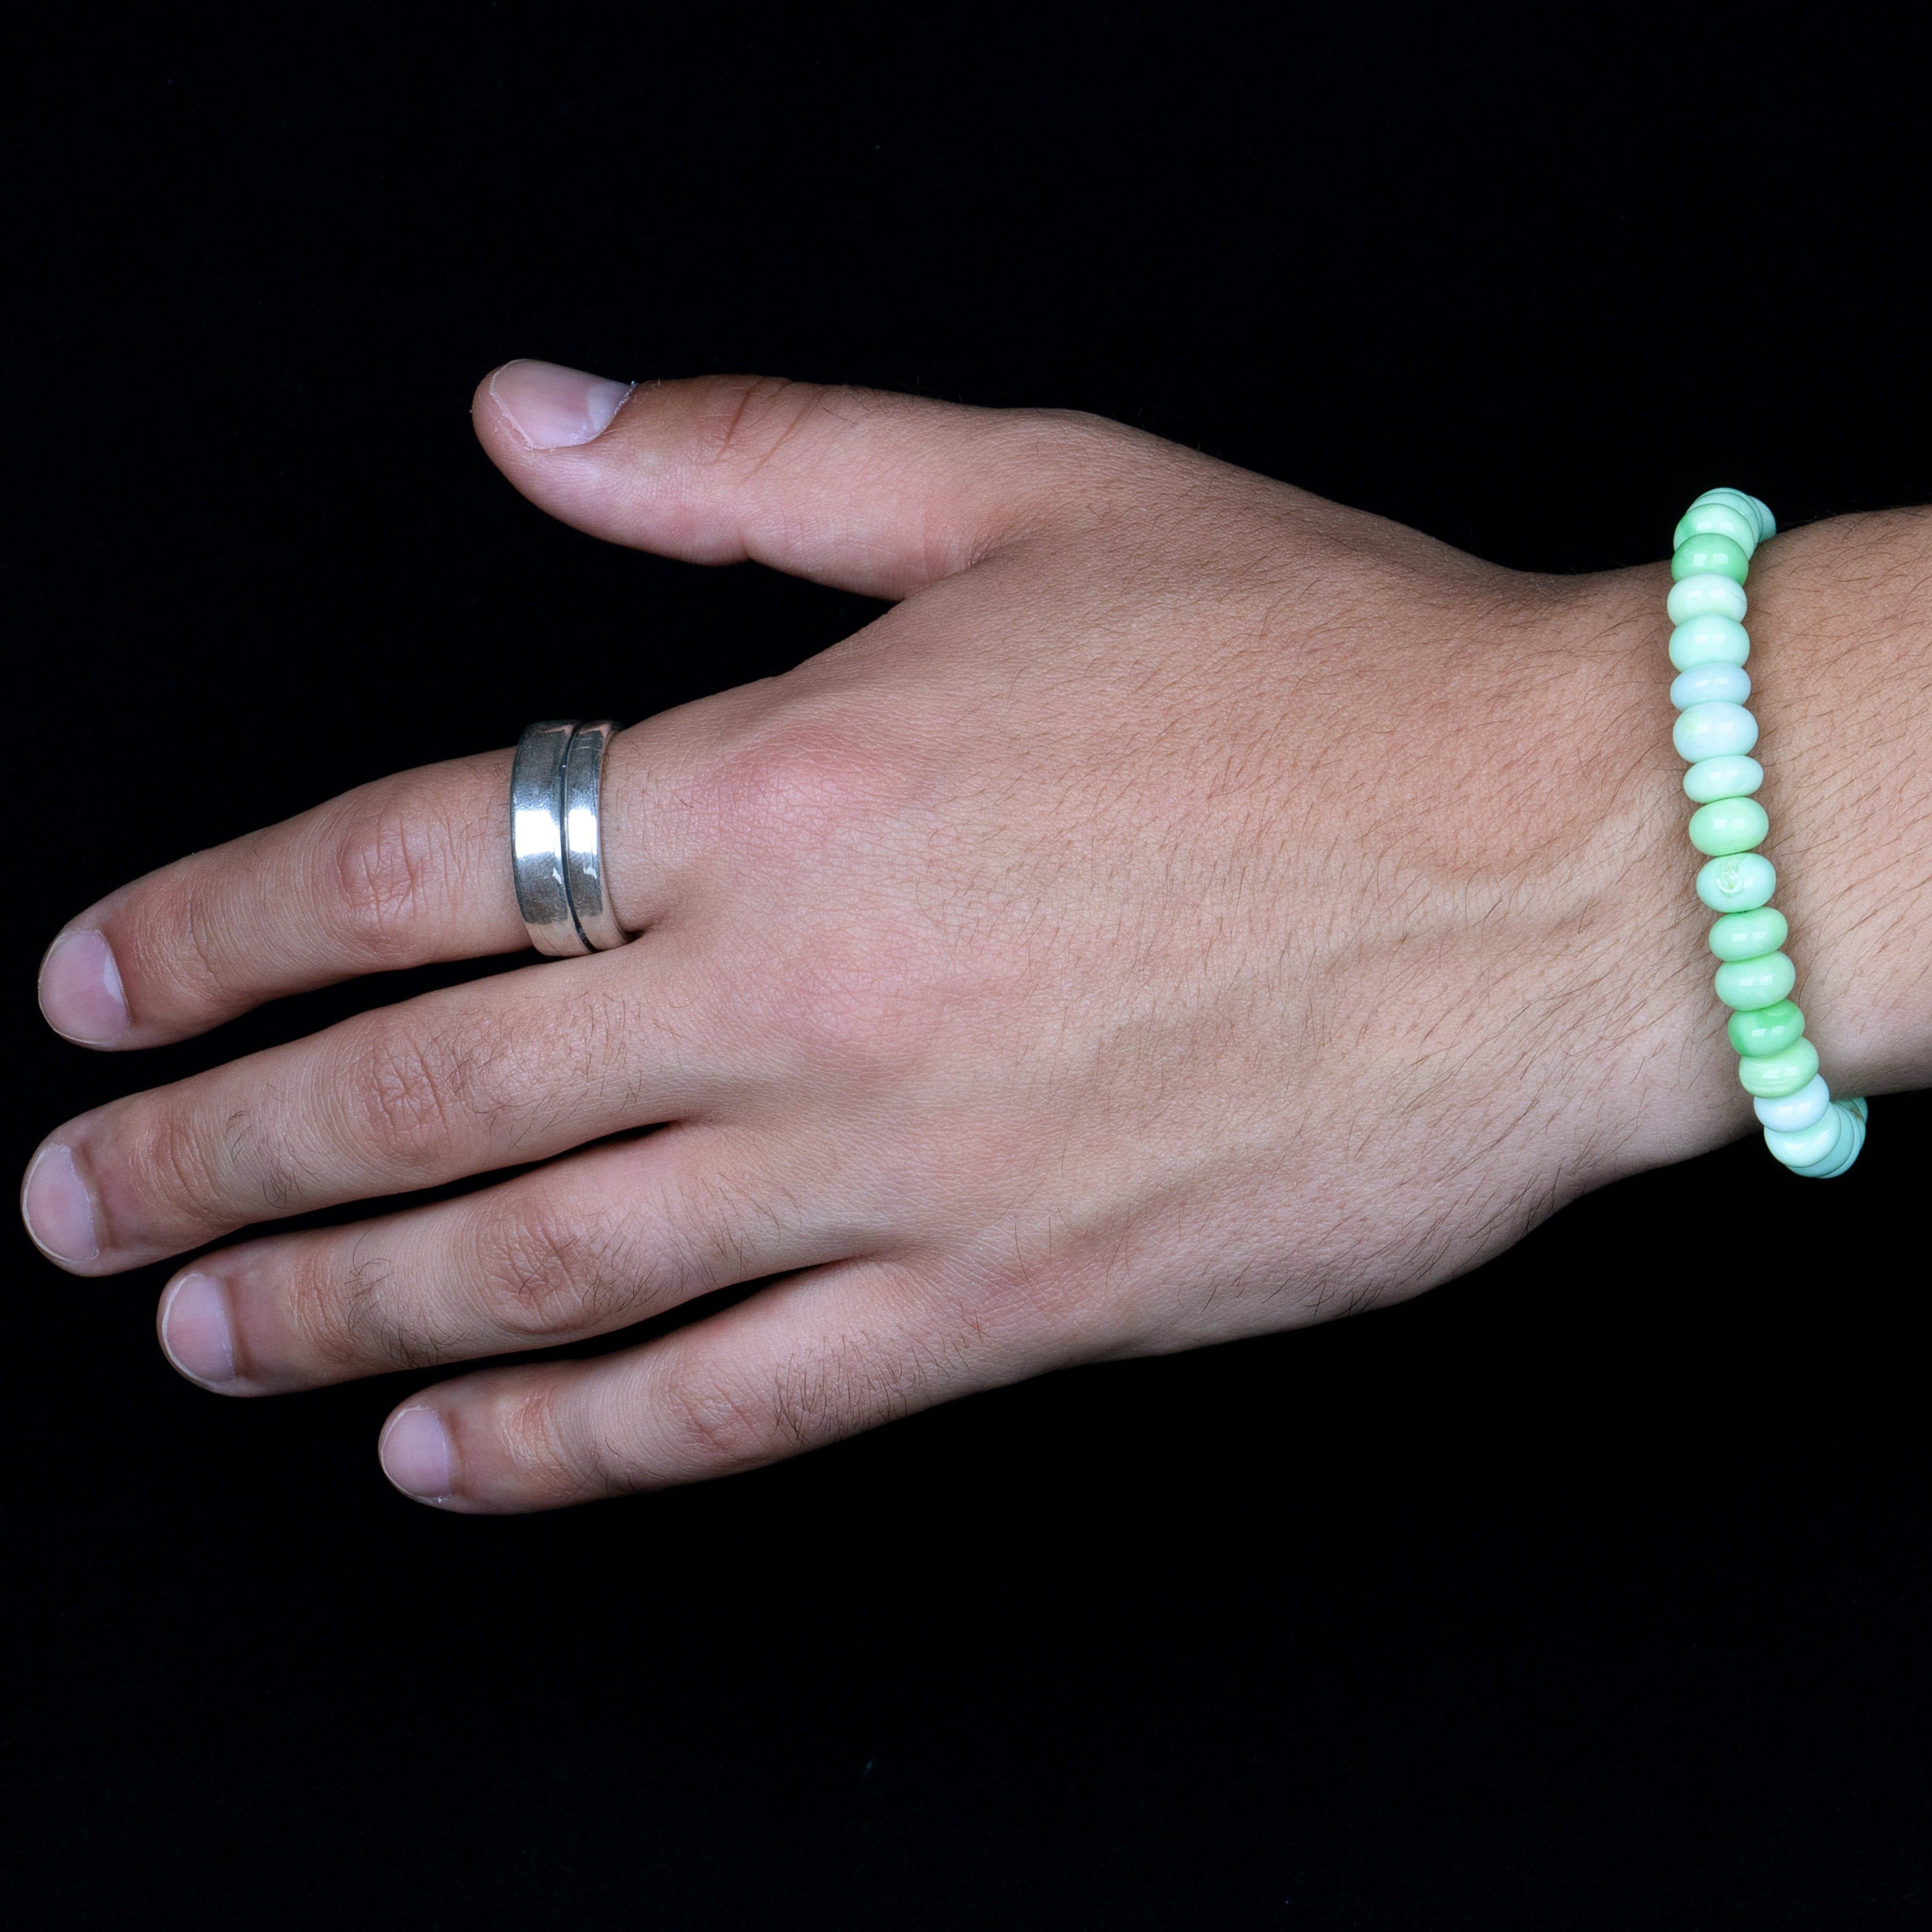 Oval Green Peruvian Opal beads on a stainless steel cable with Sterling silver T clasp. Shown on Hand model.